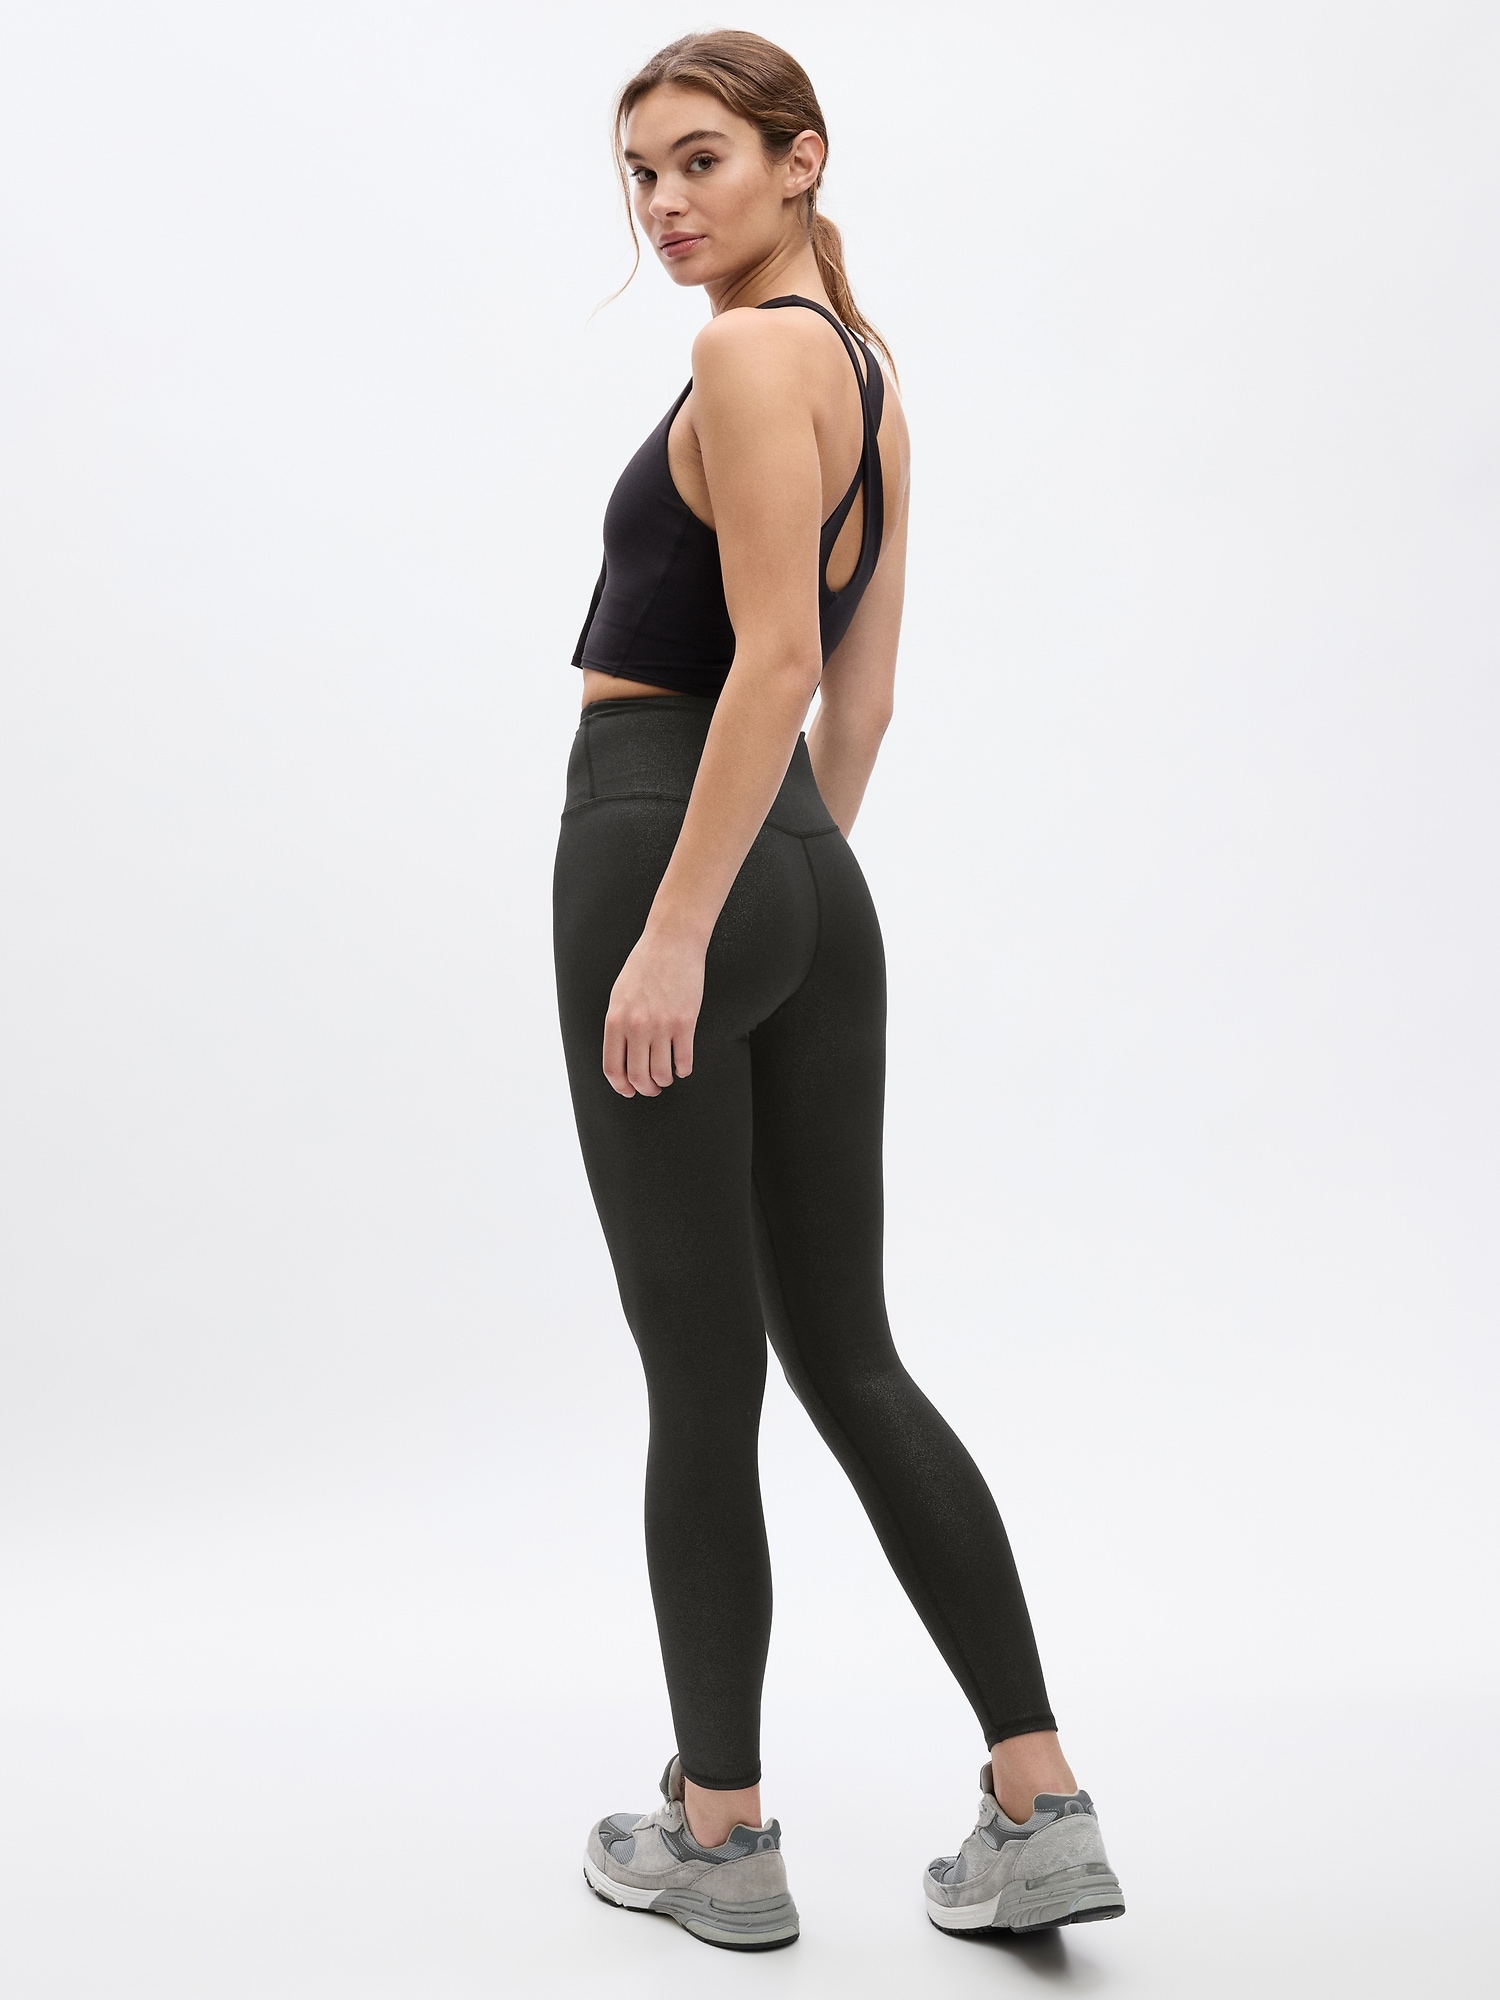 Madewell Women's Form High-Rise 26 Leggings Extra Small Mc196 ($65)